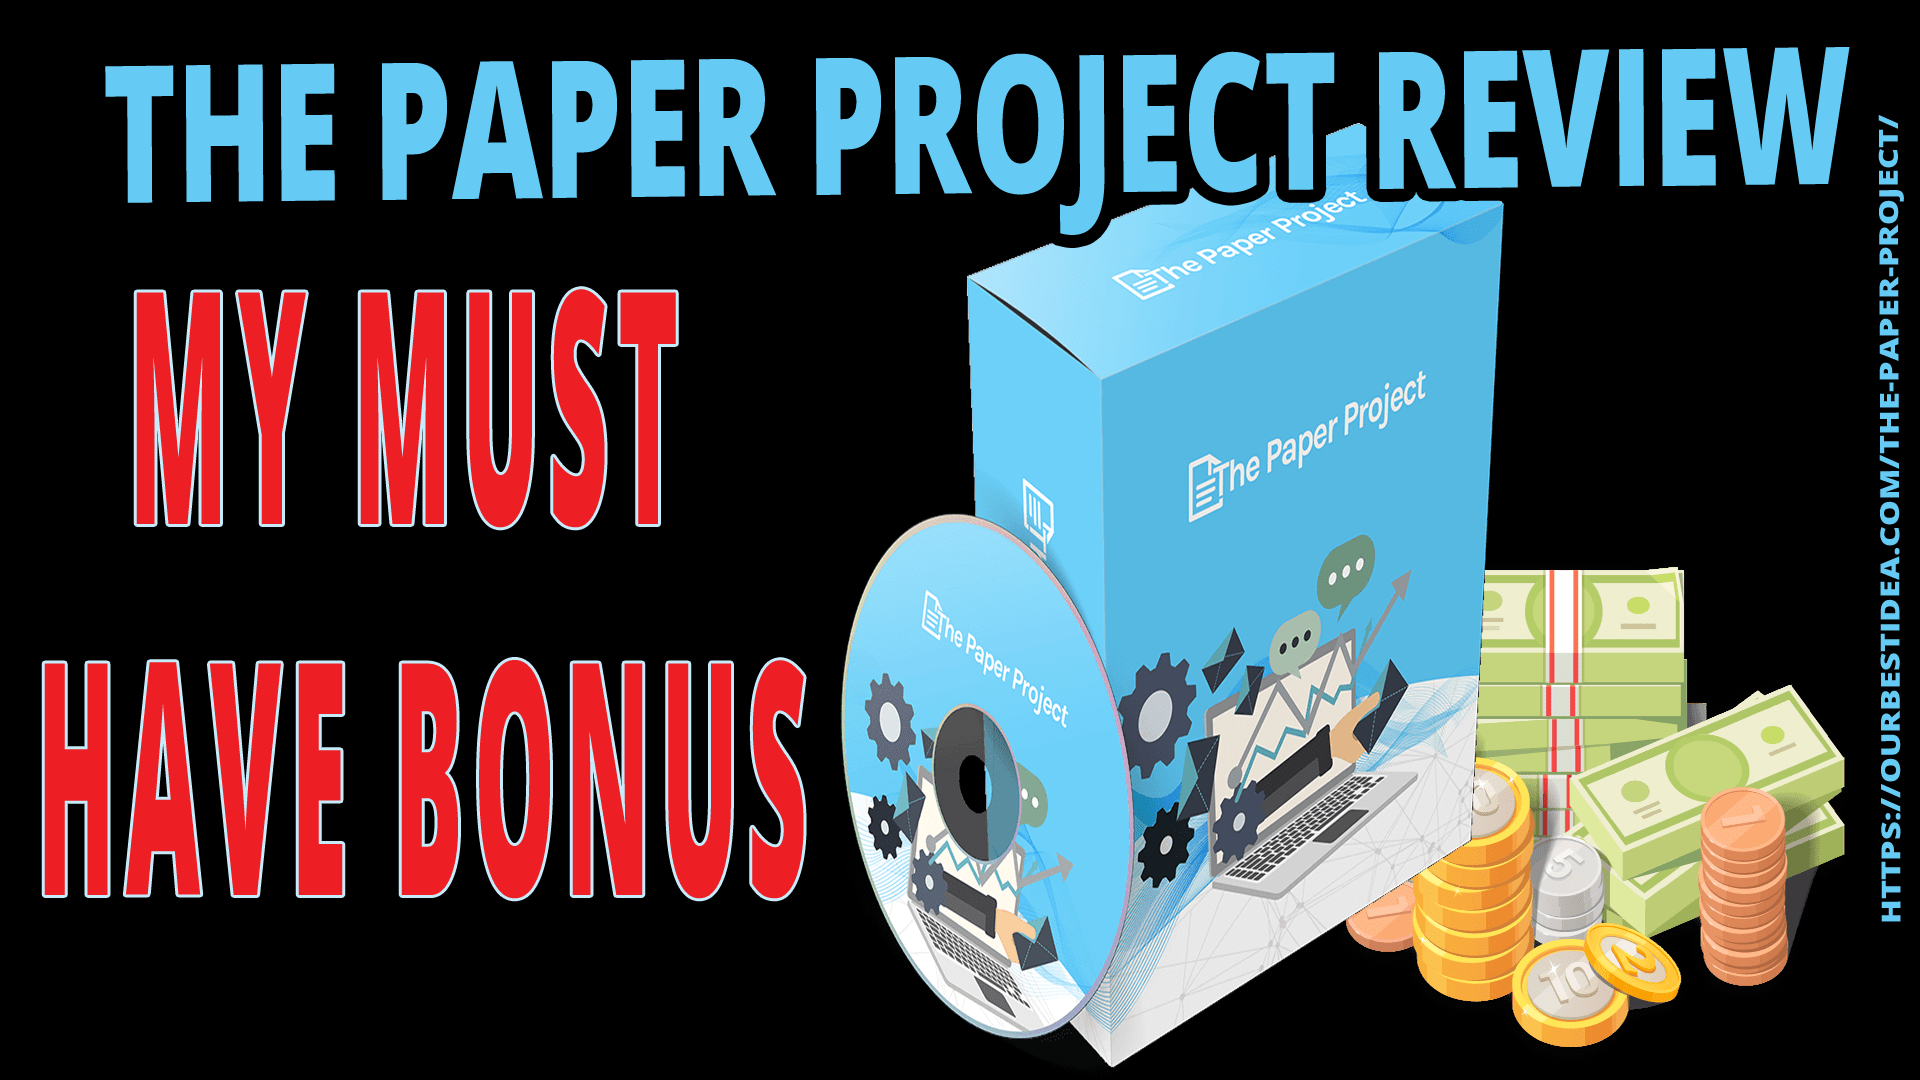 The Paper Project Review